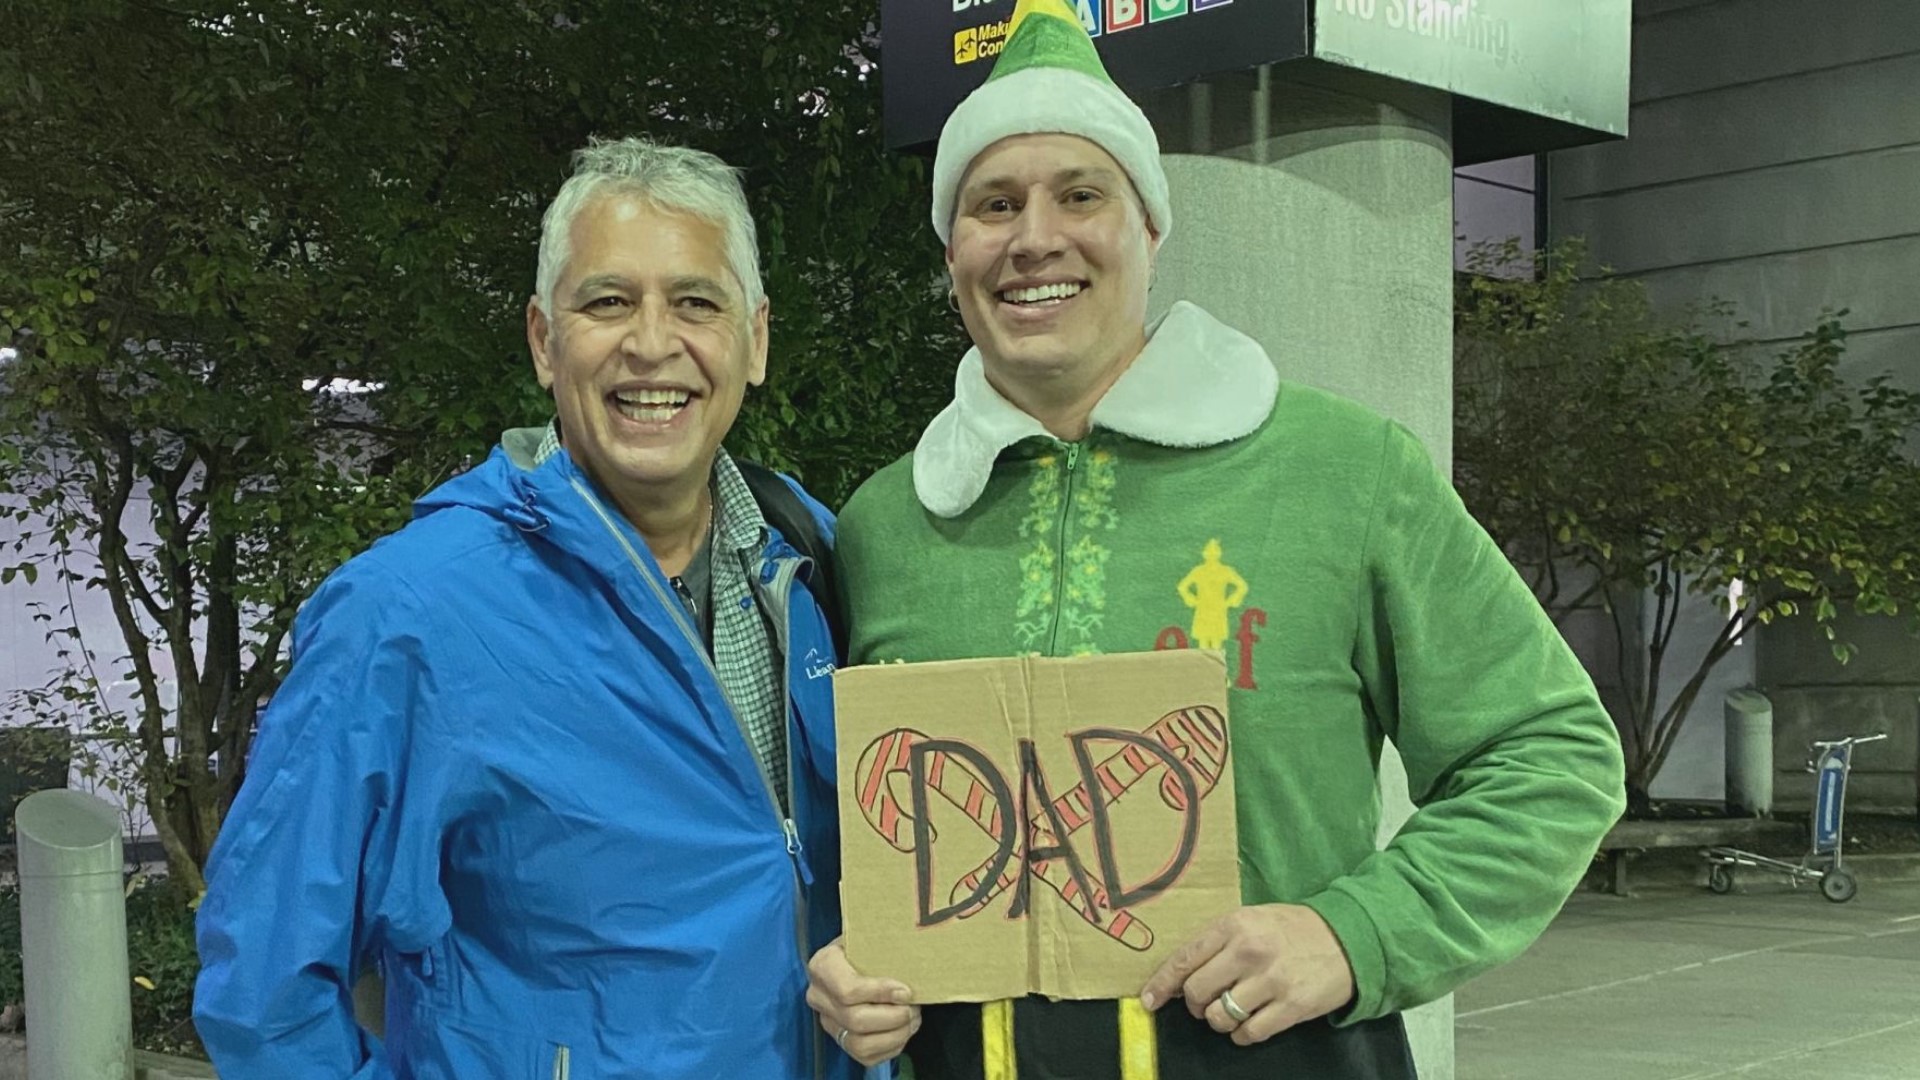 Maine man re-creates scene from 'Elf' when meeting biological father for first time